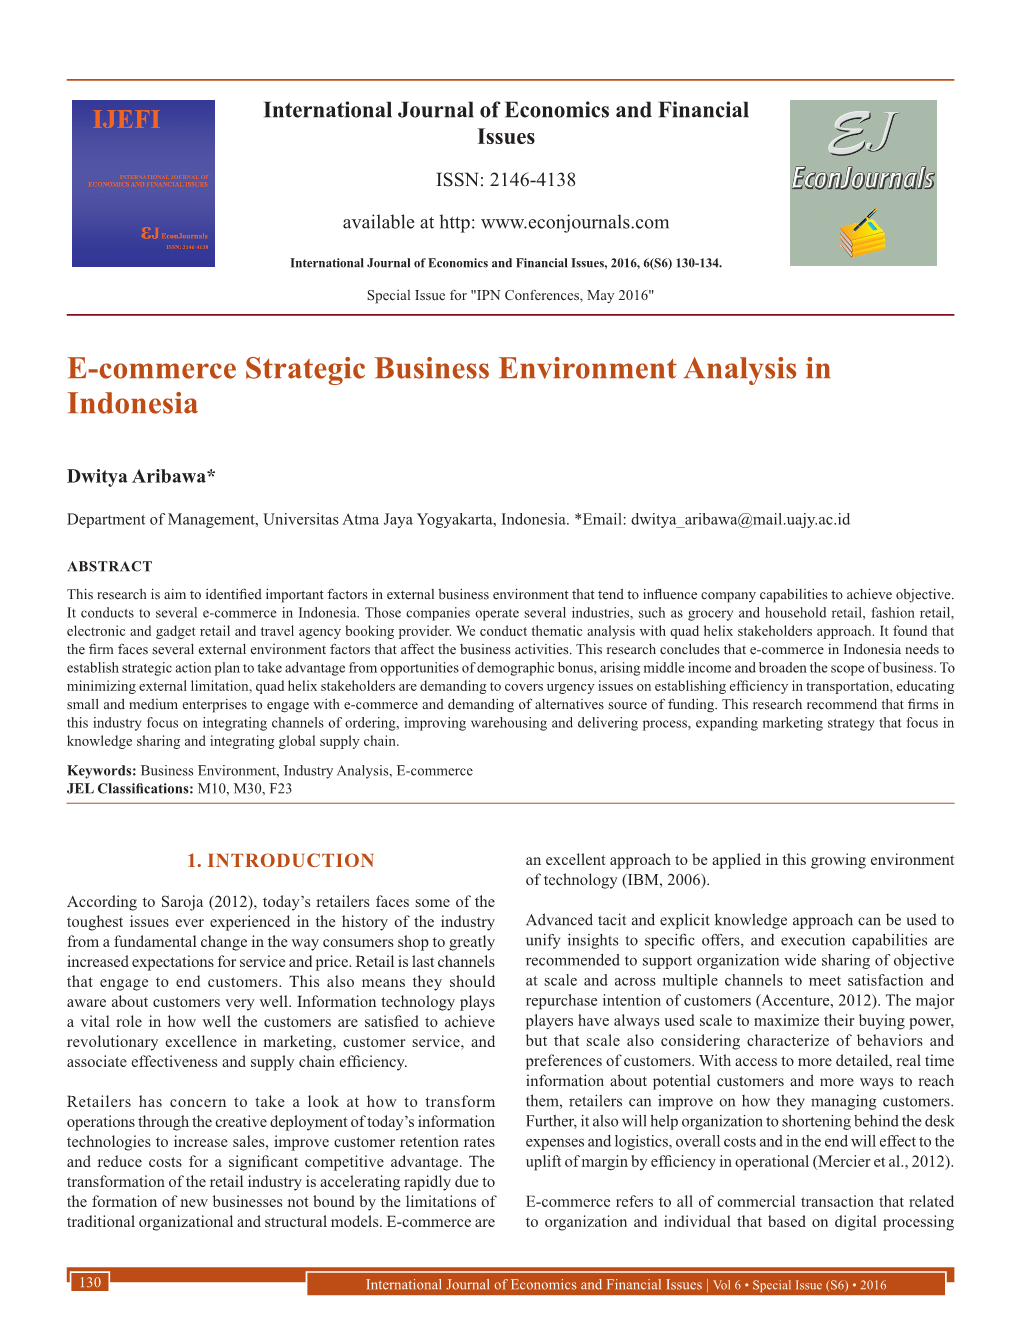 E-Commerce Strategic Business Environment Analysis in Indonesia